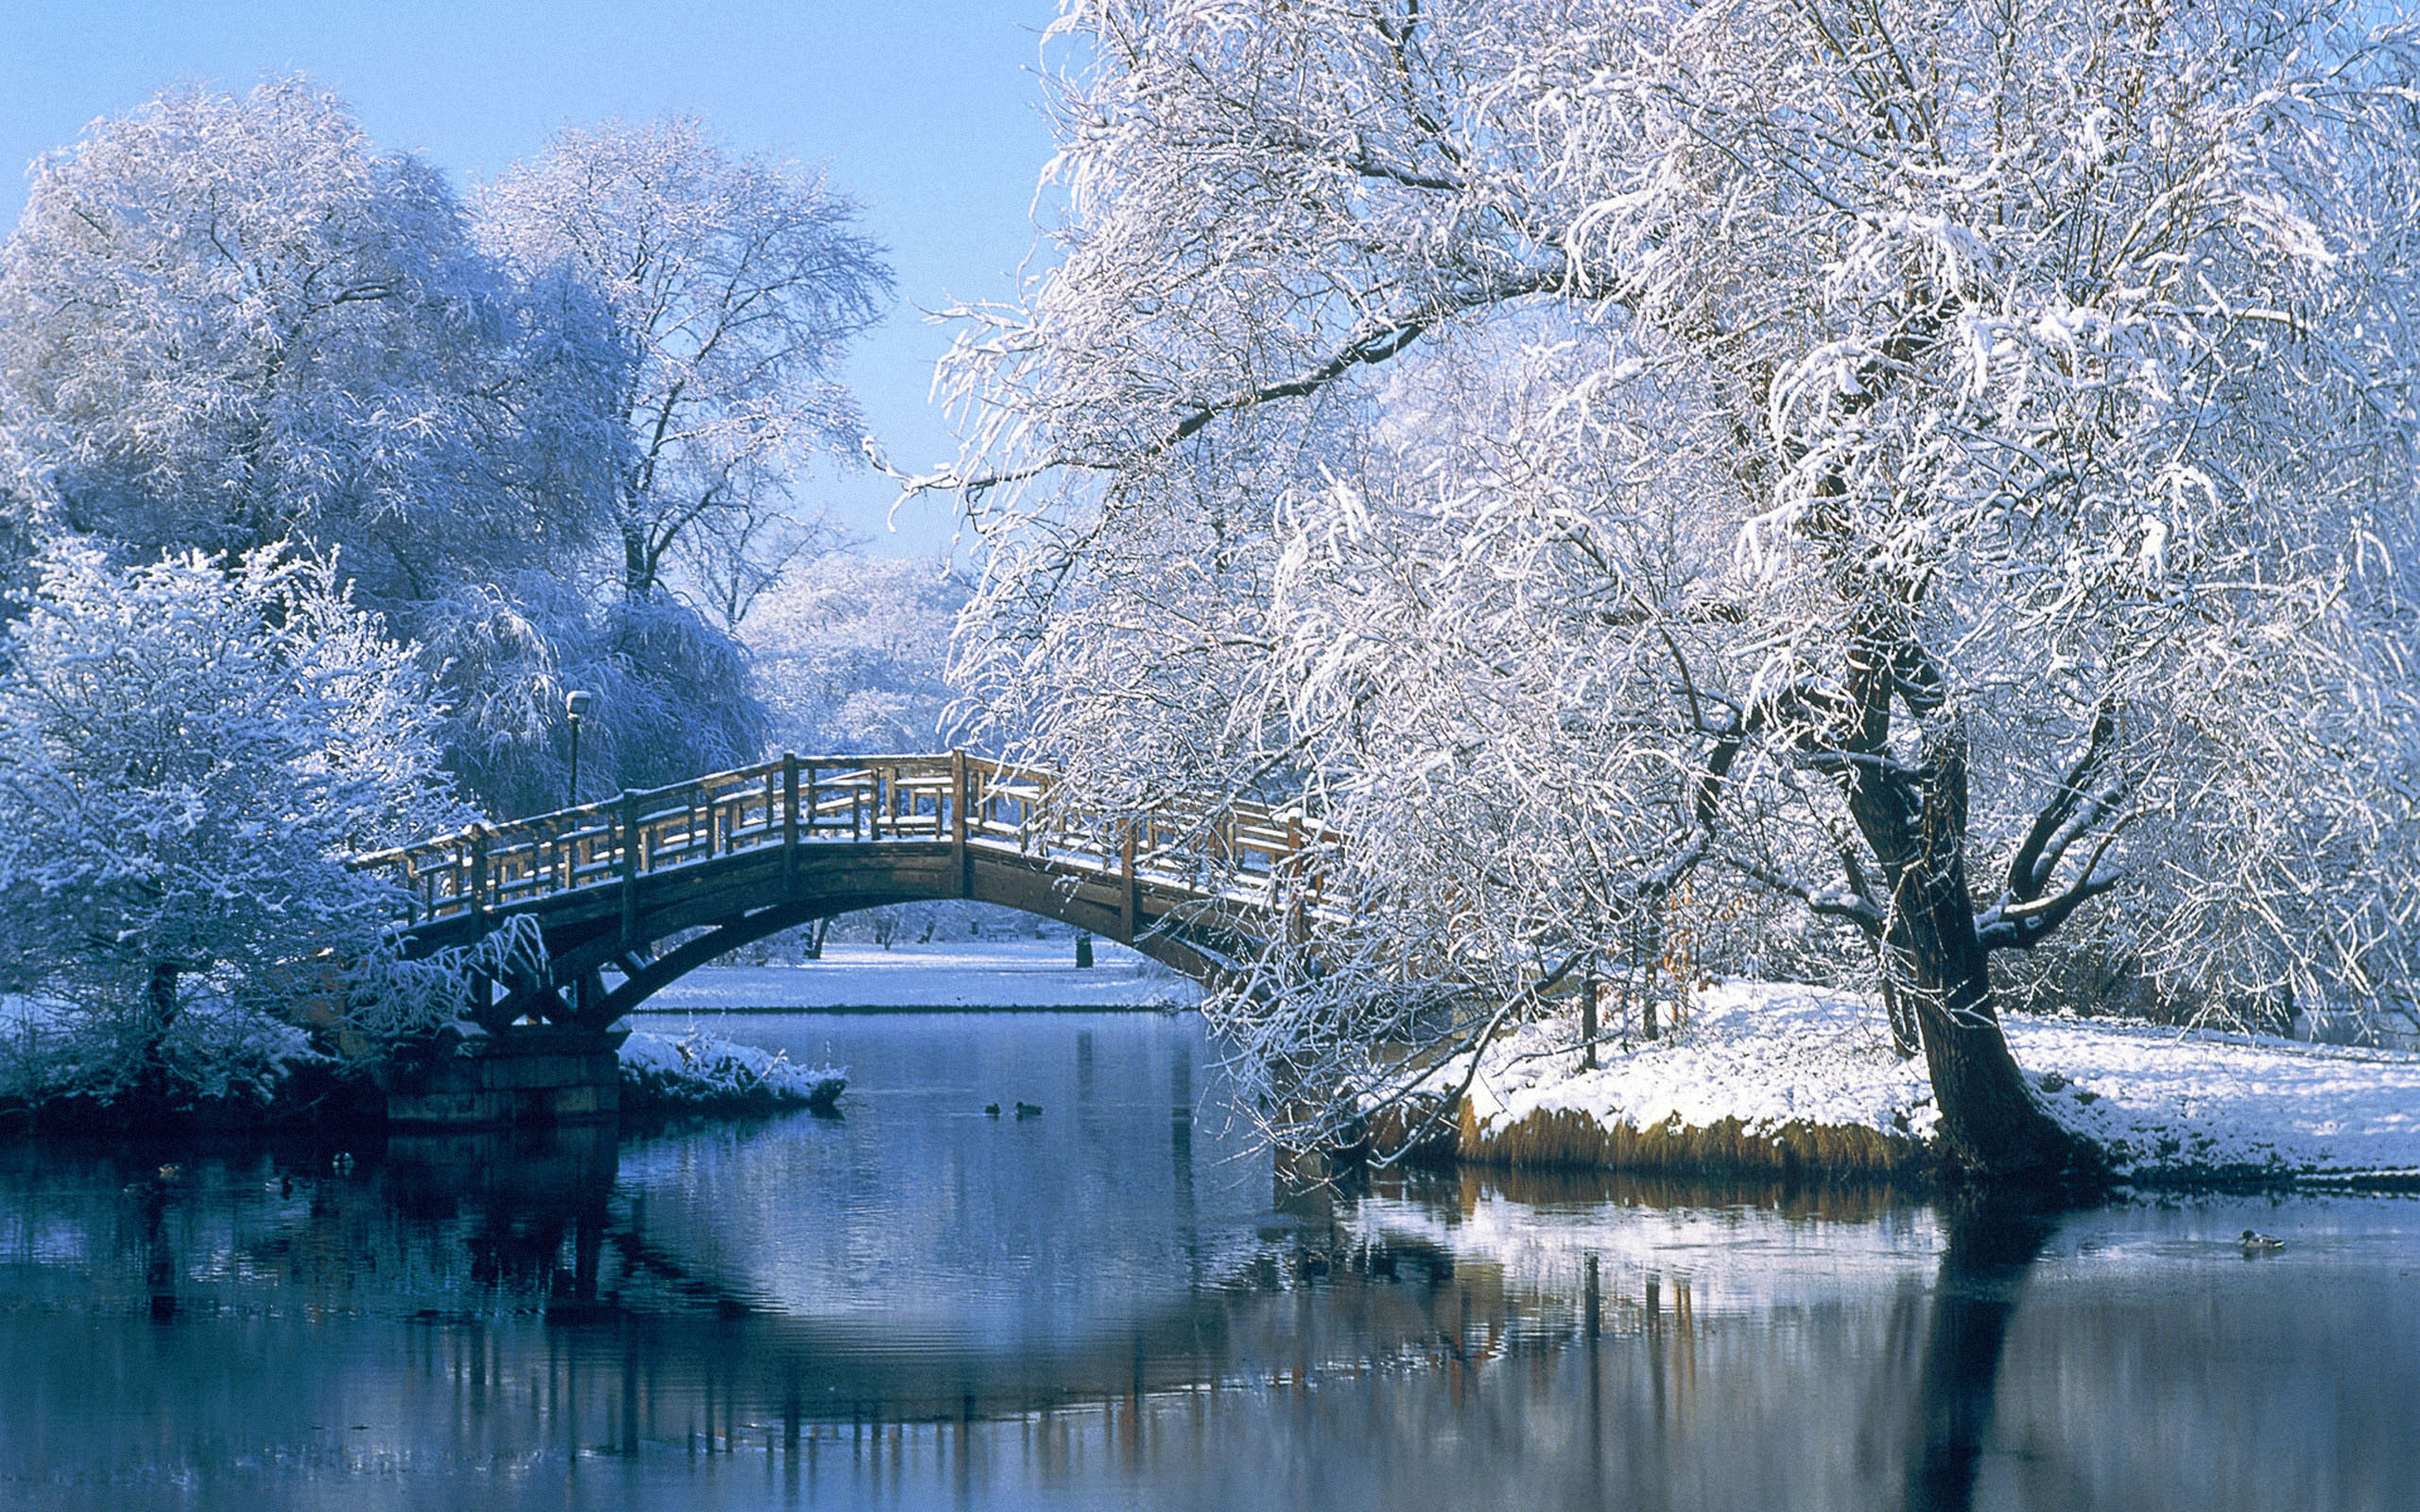 2560x1600 Christmas Snow Scenes Screensaver 0 HTML code. Source URL:  http://www.thewallpapers.org/382/nature